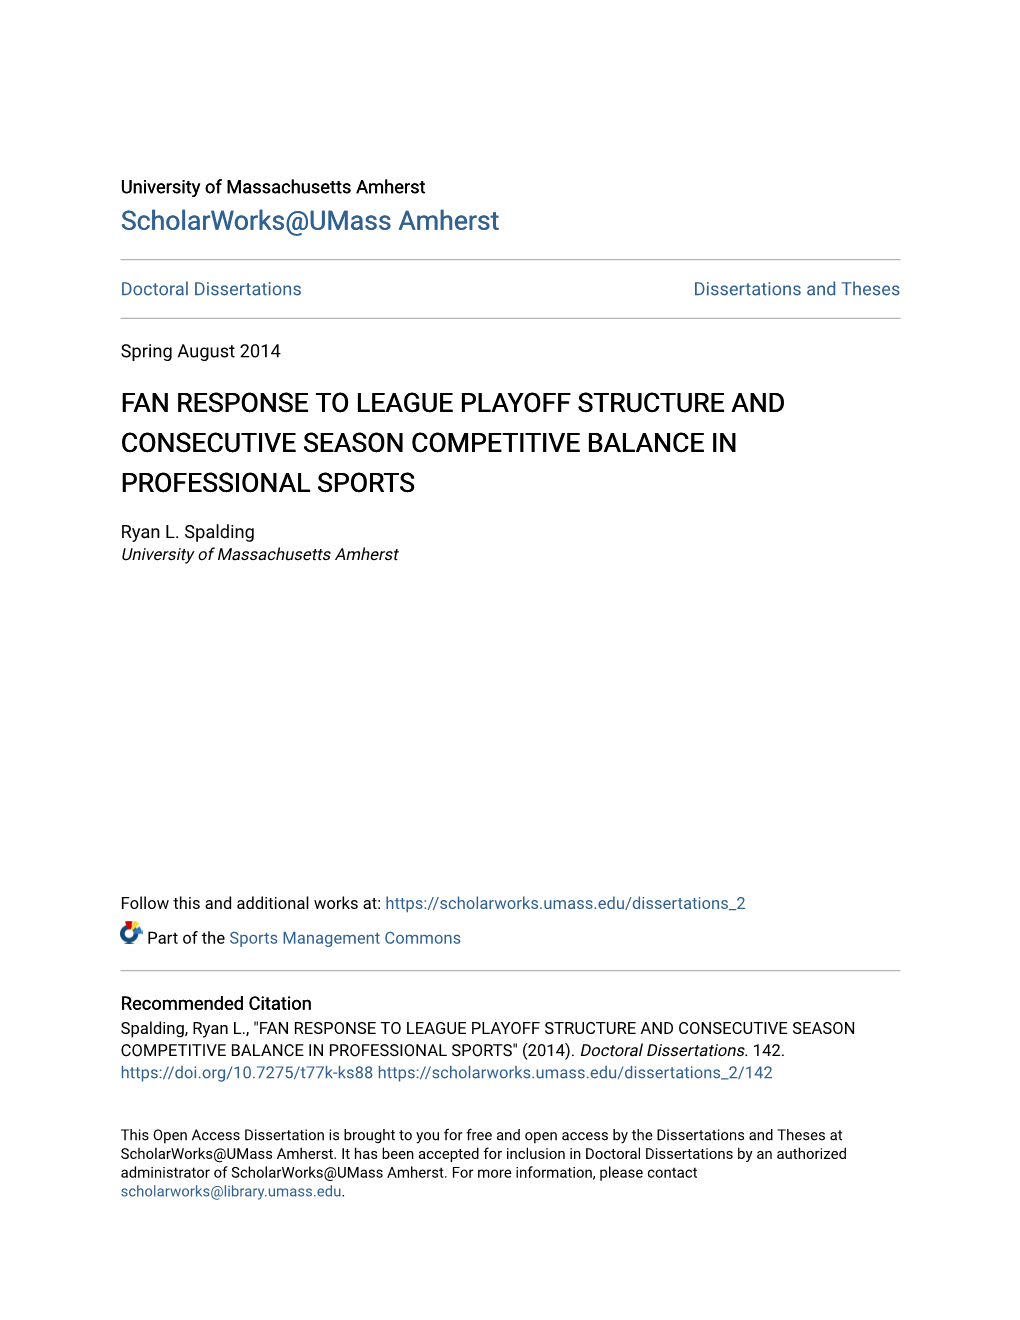 Fan Response to League Playoff Structure and Consecutive Season Competitive Balance in Professional Sports